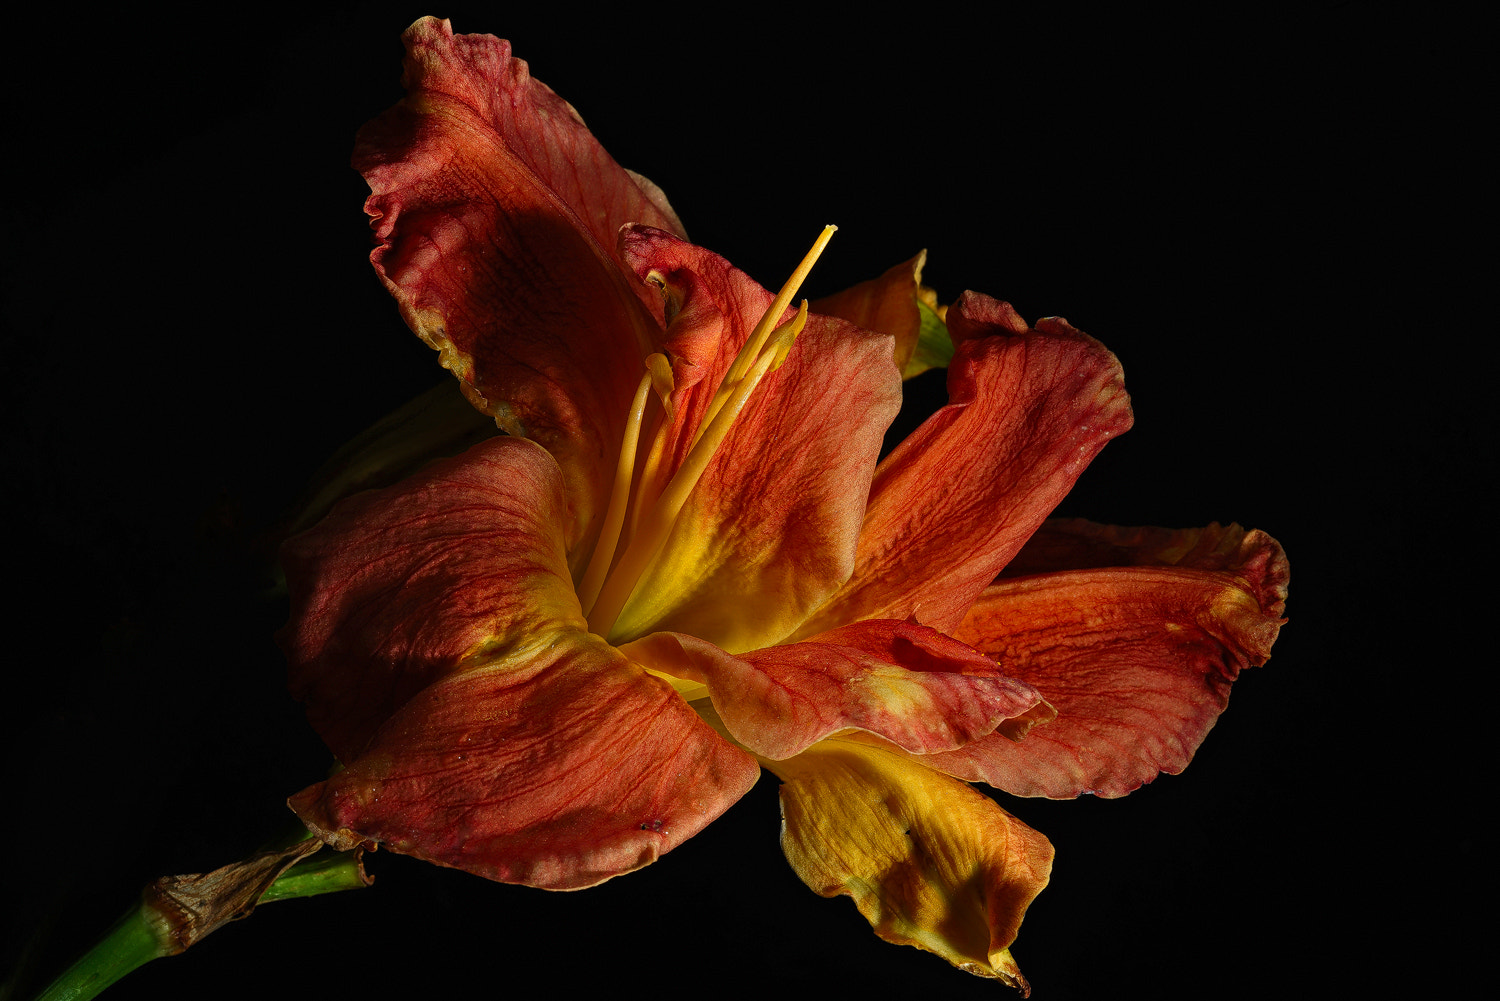 100mm F2.8 SSM sample photo. Not your usual lily photography